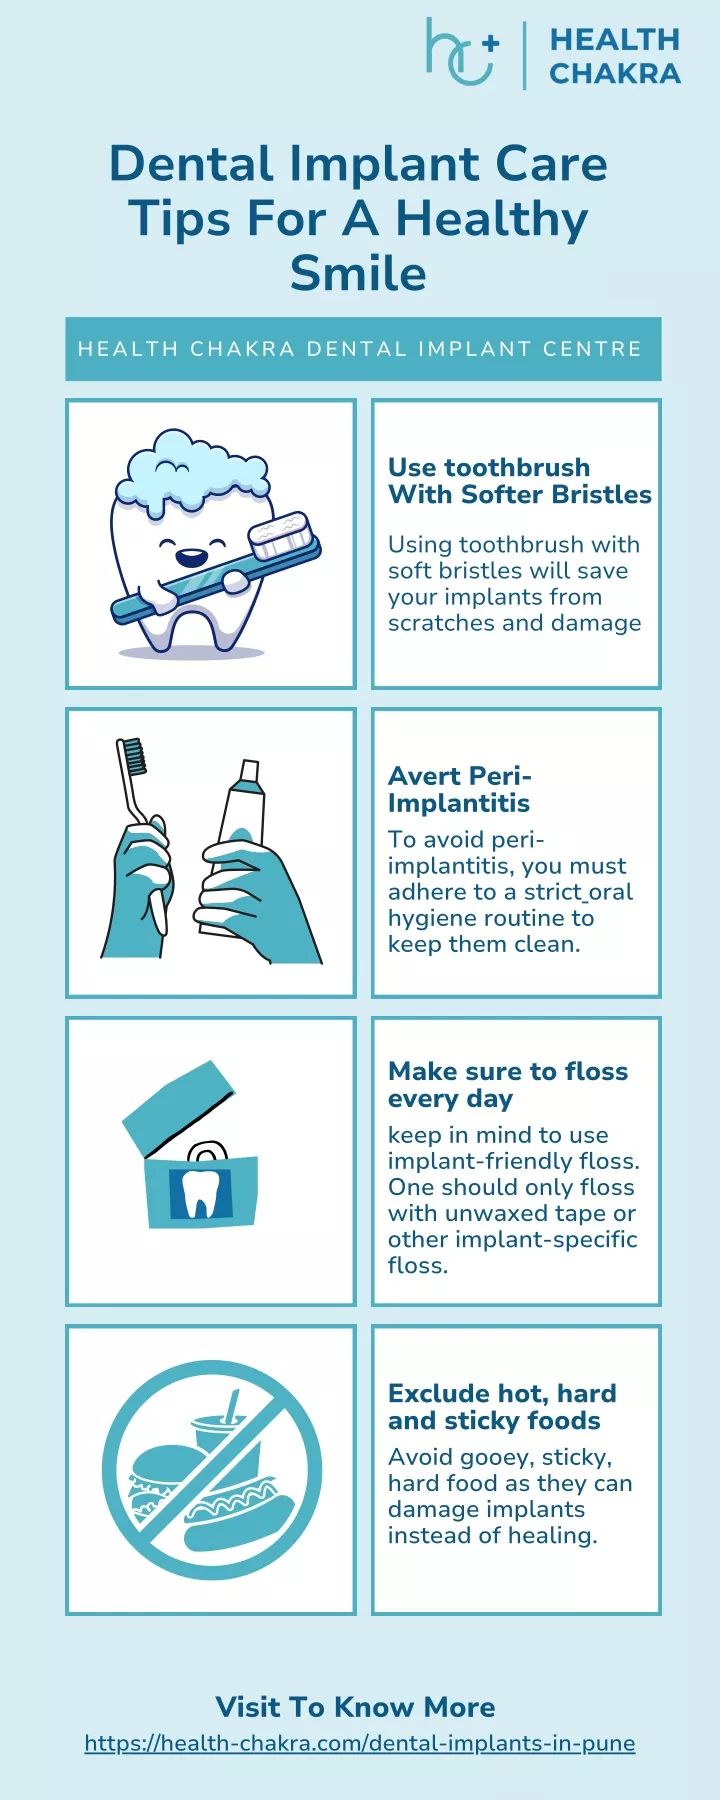 dental implant care tips for a healthy smile